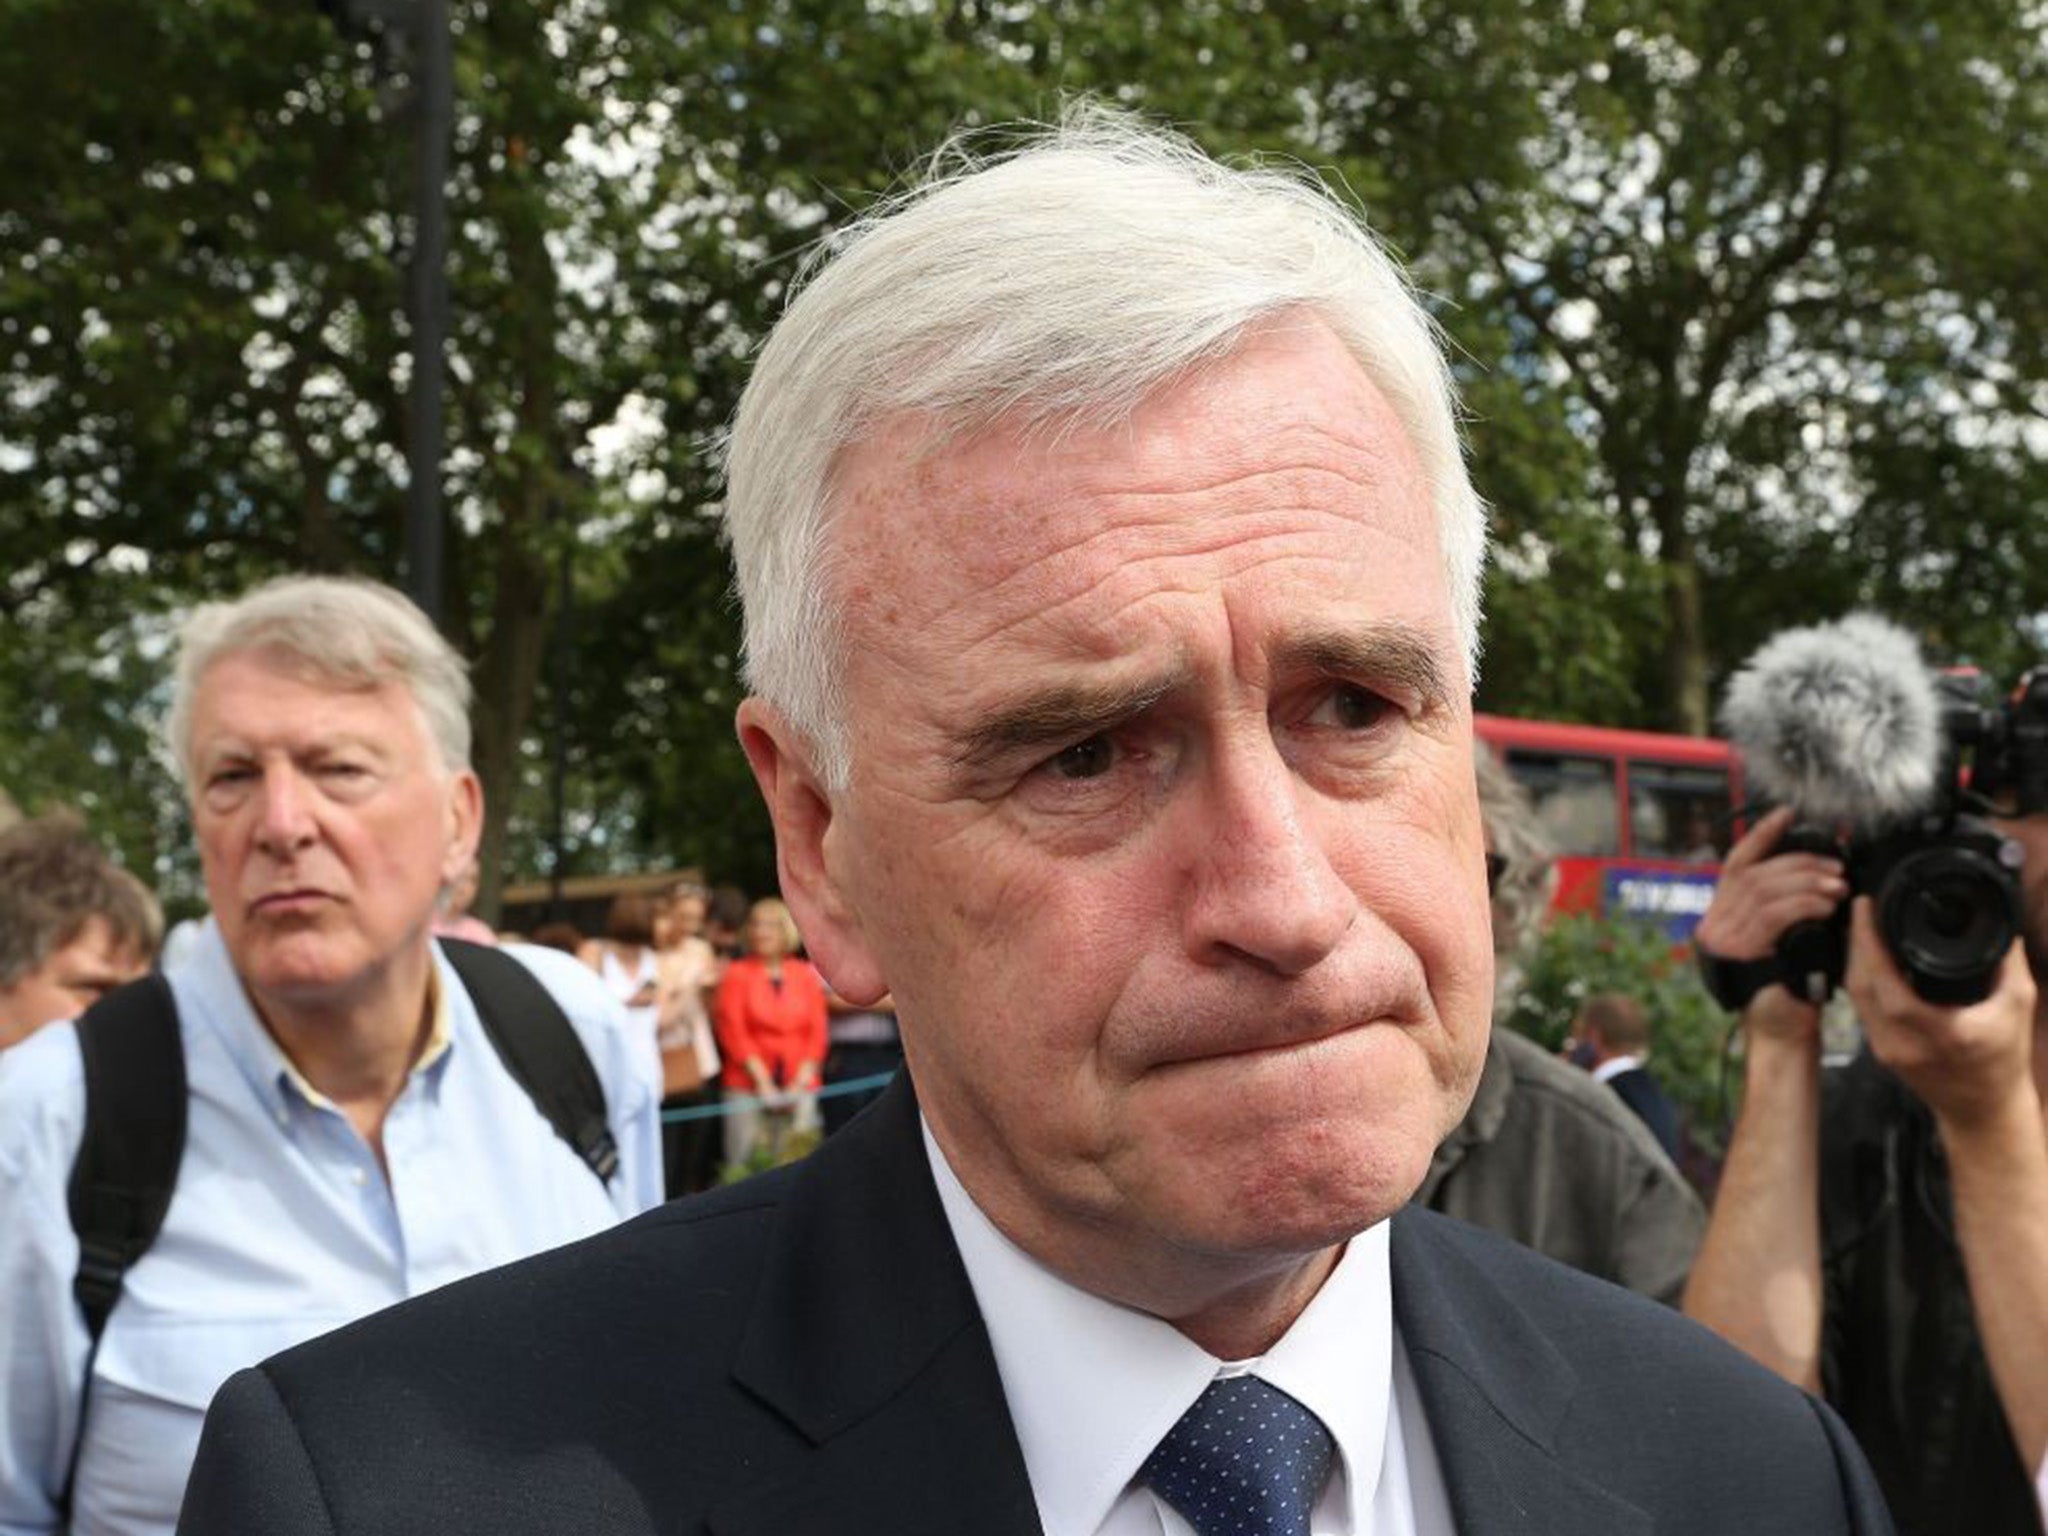 John McDonnell condemned the High Court's decision